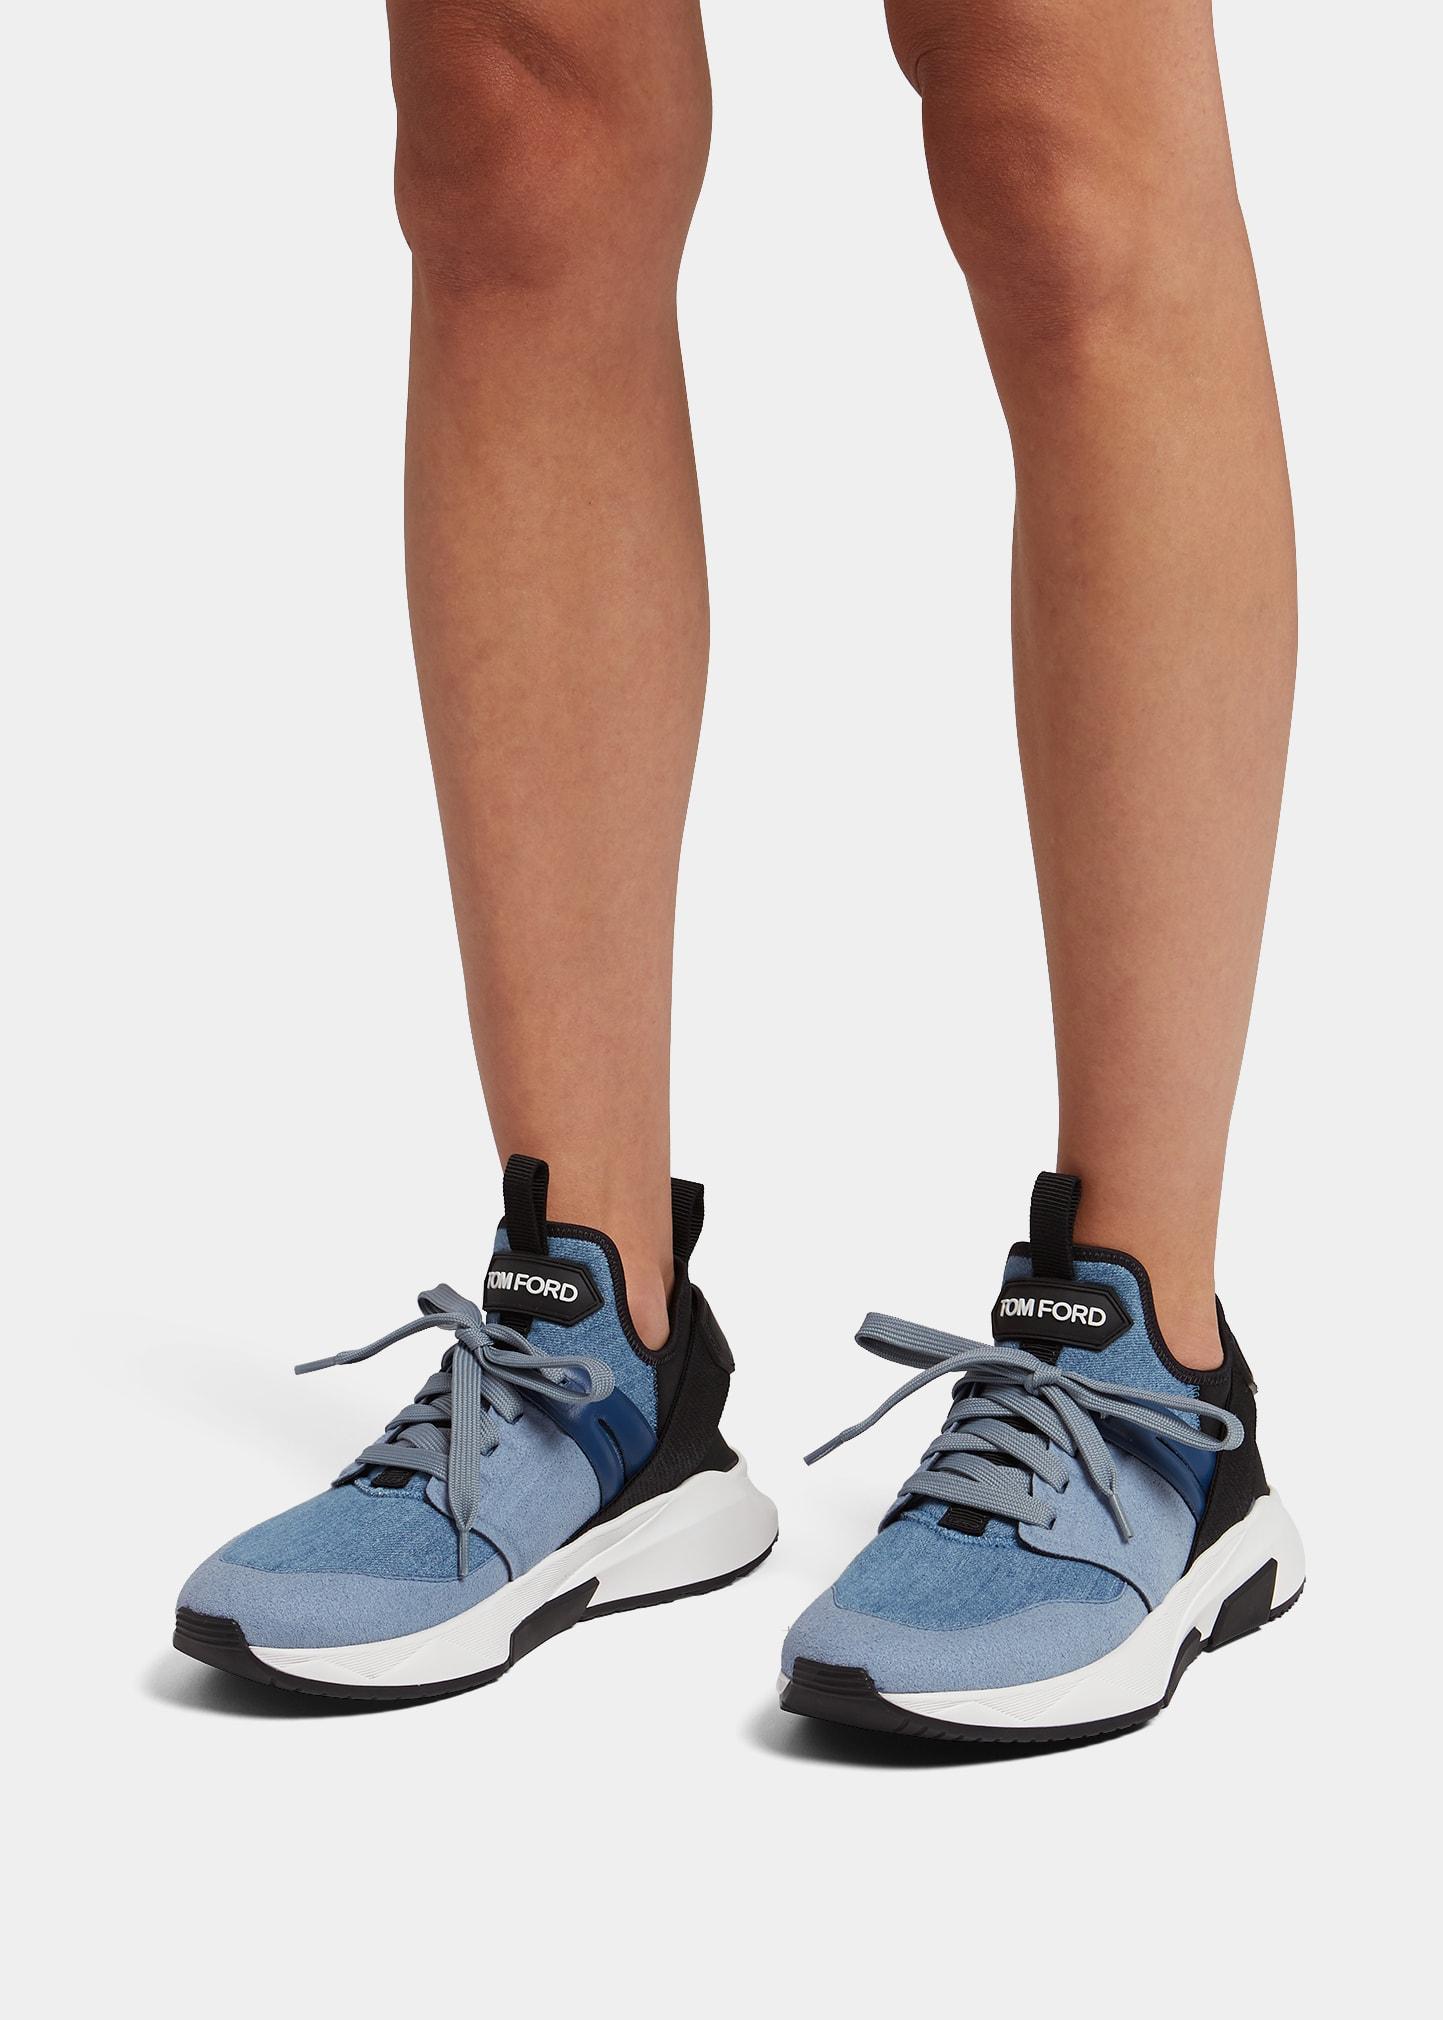 Tom Ford Stretch Denim Trainer Sneakers in Blue | Lyst